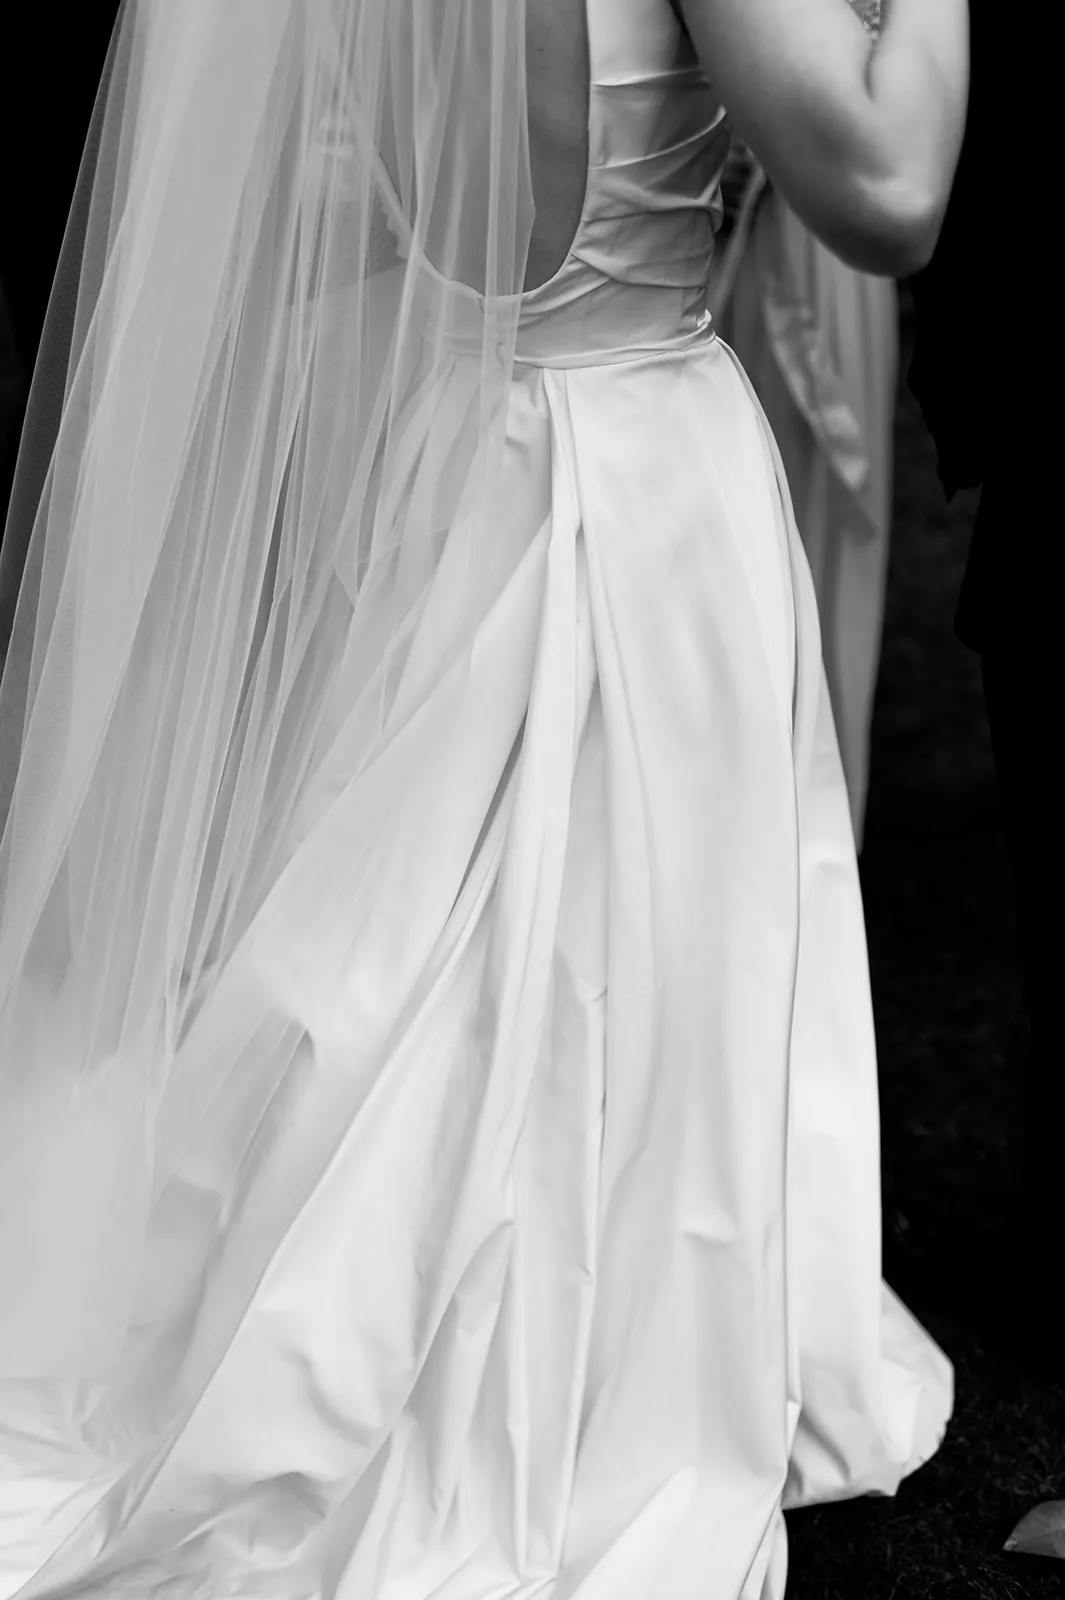 Black-and-white photo of a bride, focusing on the back of her wedding dress and veil. The dress features a low back and elegant folds, with the veil cascading down. Other people are slightly visible around her.